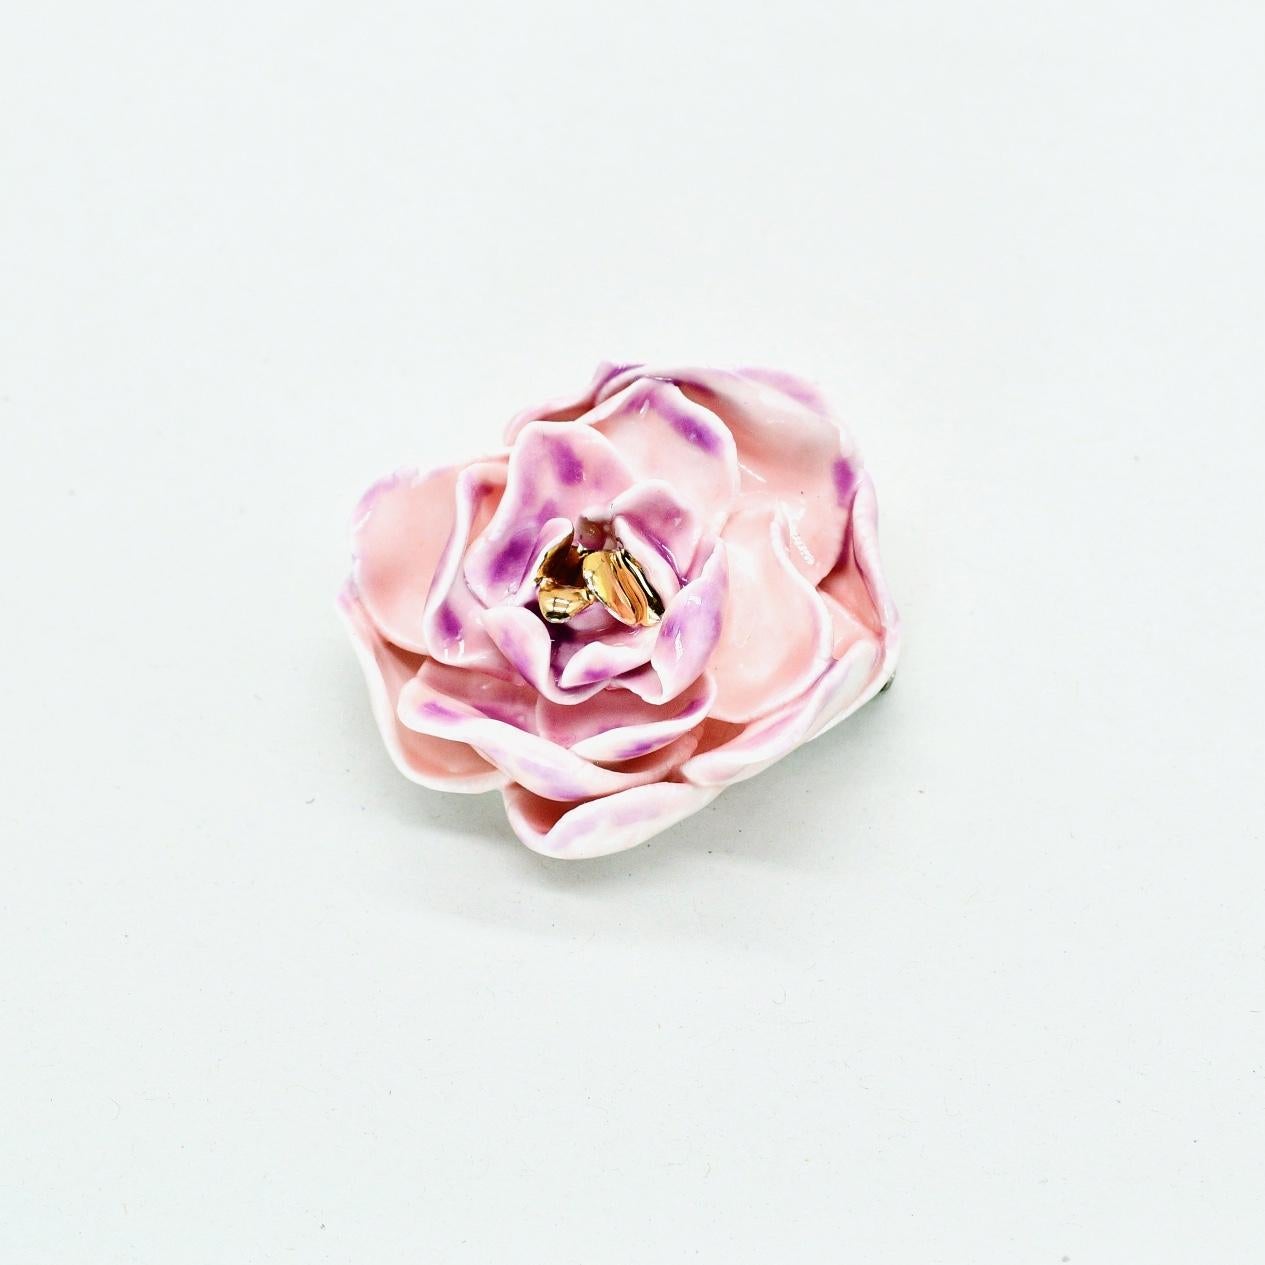 Porcelain  24k gold  Sterling Silver  Handmade in London

Introducing our ROSARIA Porcelain Ceramic Brooch - a wearable piece of art crafted from luxurious white porcelain. This unique brooch features a miniature sculpture of a rose, adorned with a